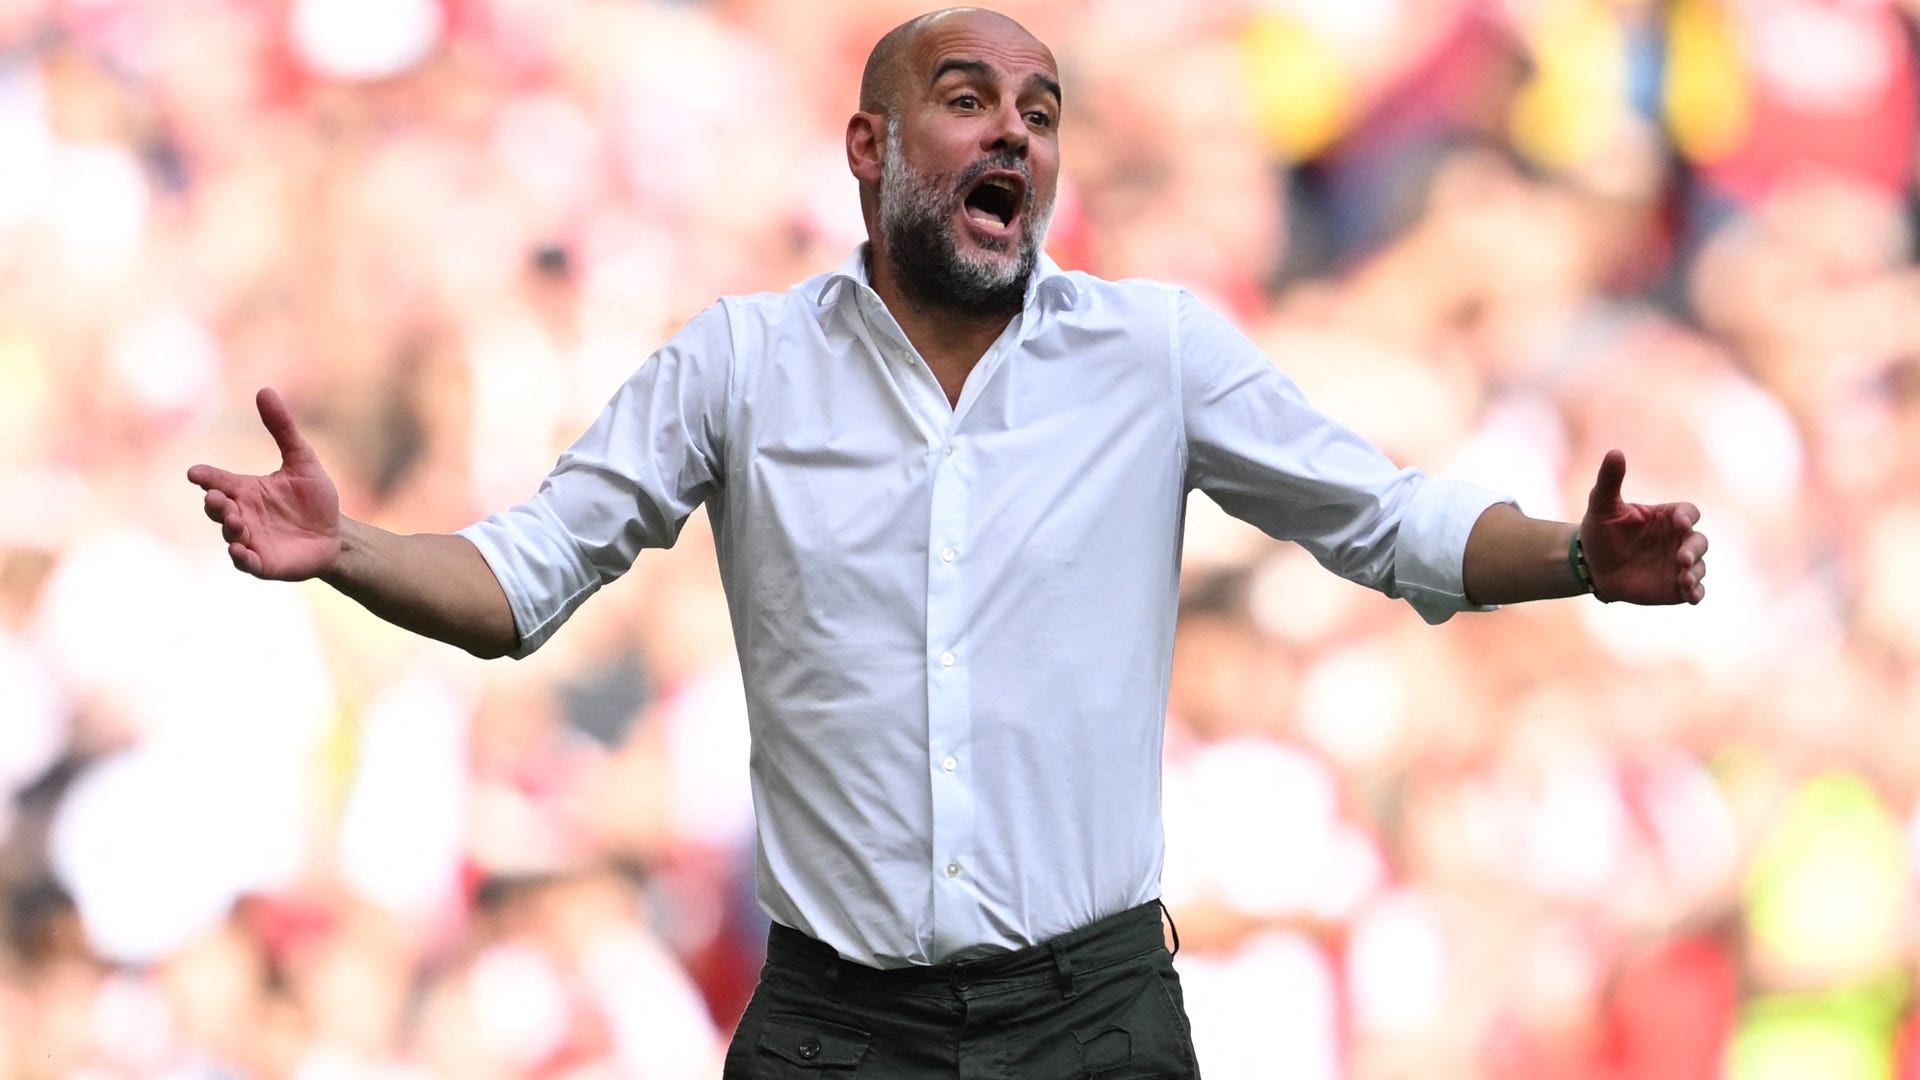 ‘Now games will be 100 mins that’s for sure’ – Man City boss Pep Guardiola fumes at new stoppage time rules after Community Shield loss to Arsenal, but Mikel Arteta disagrees